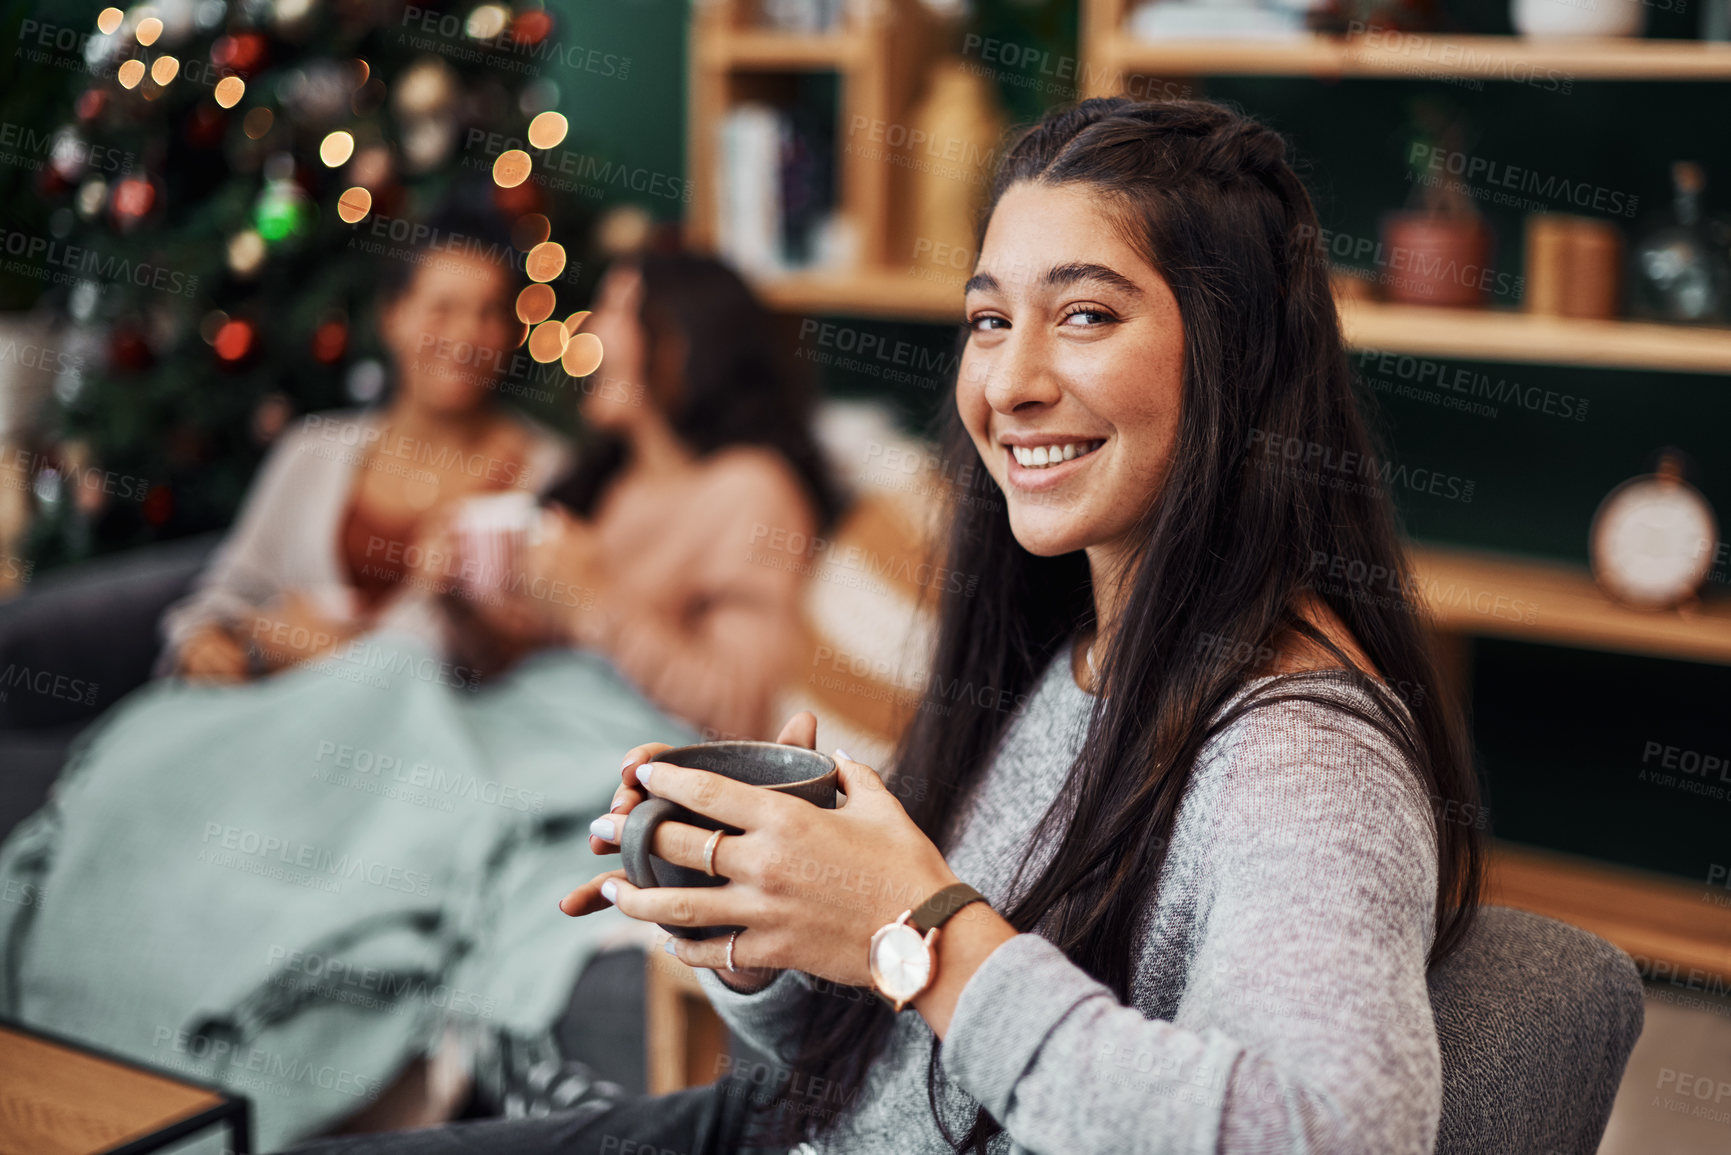 Buy stock photo Shot of a beautiful young woman enjoying a warm beverage with her friends in the background during Christmas at home